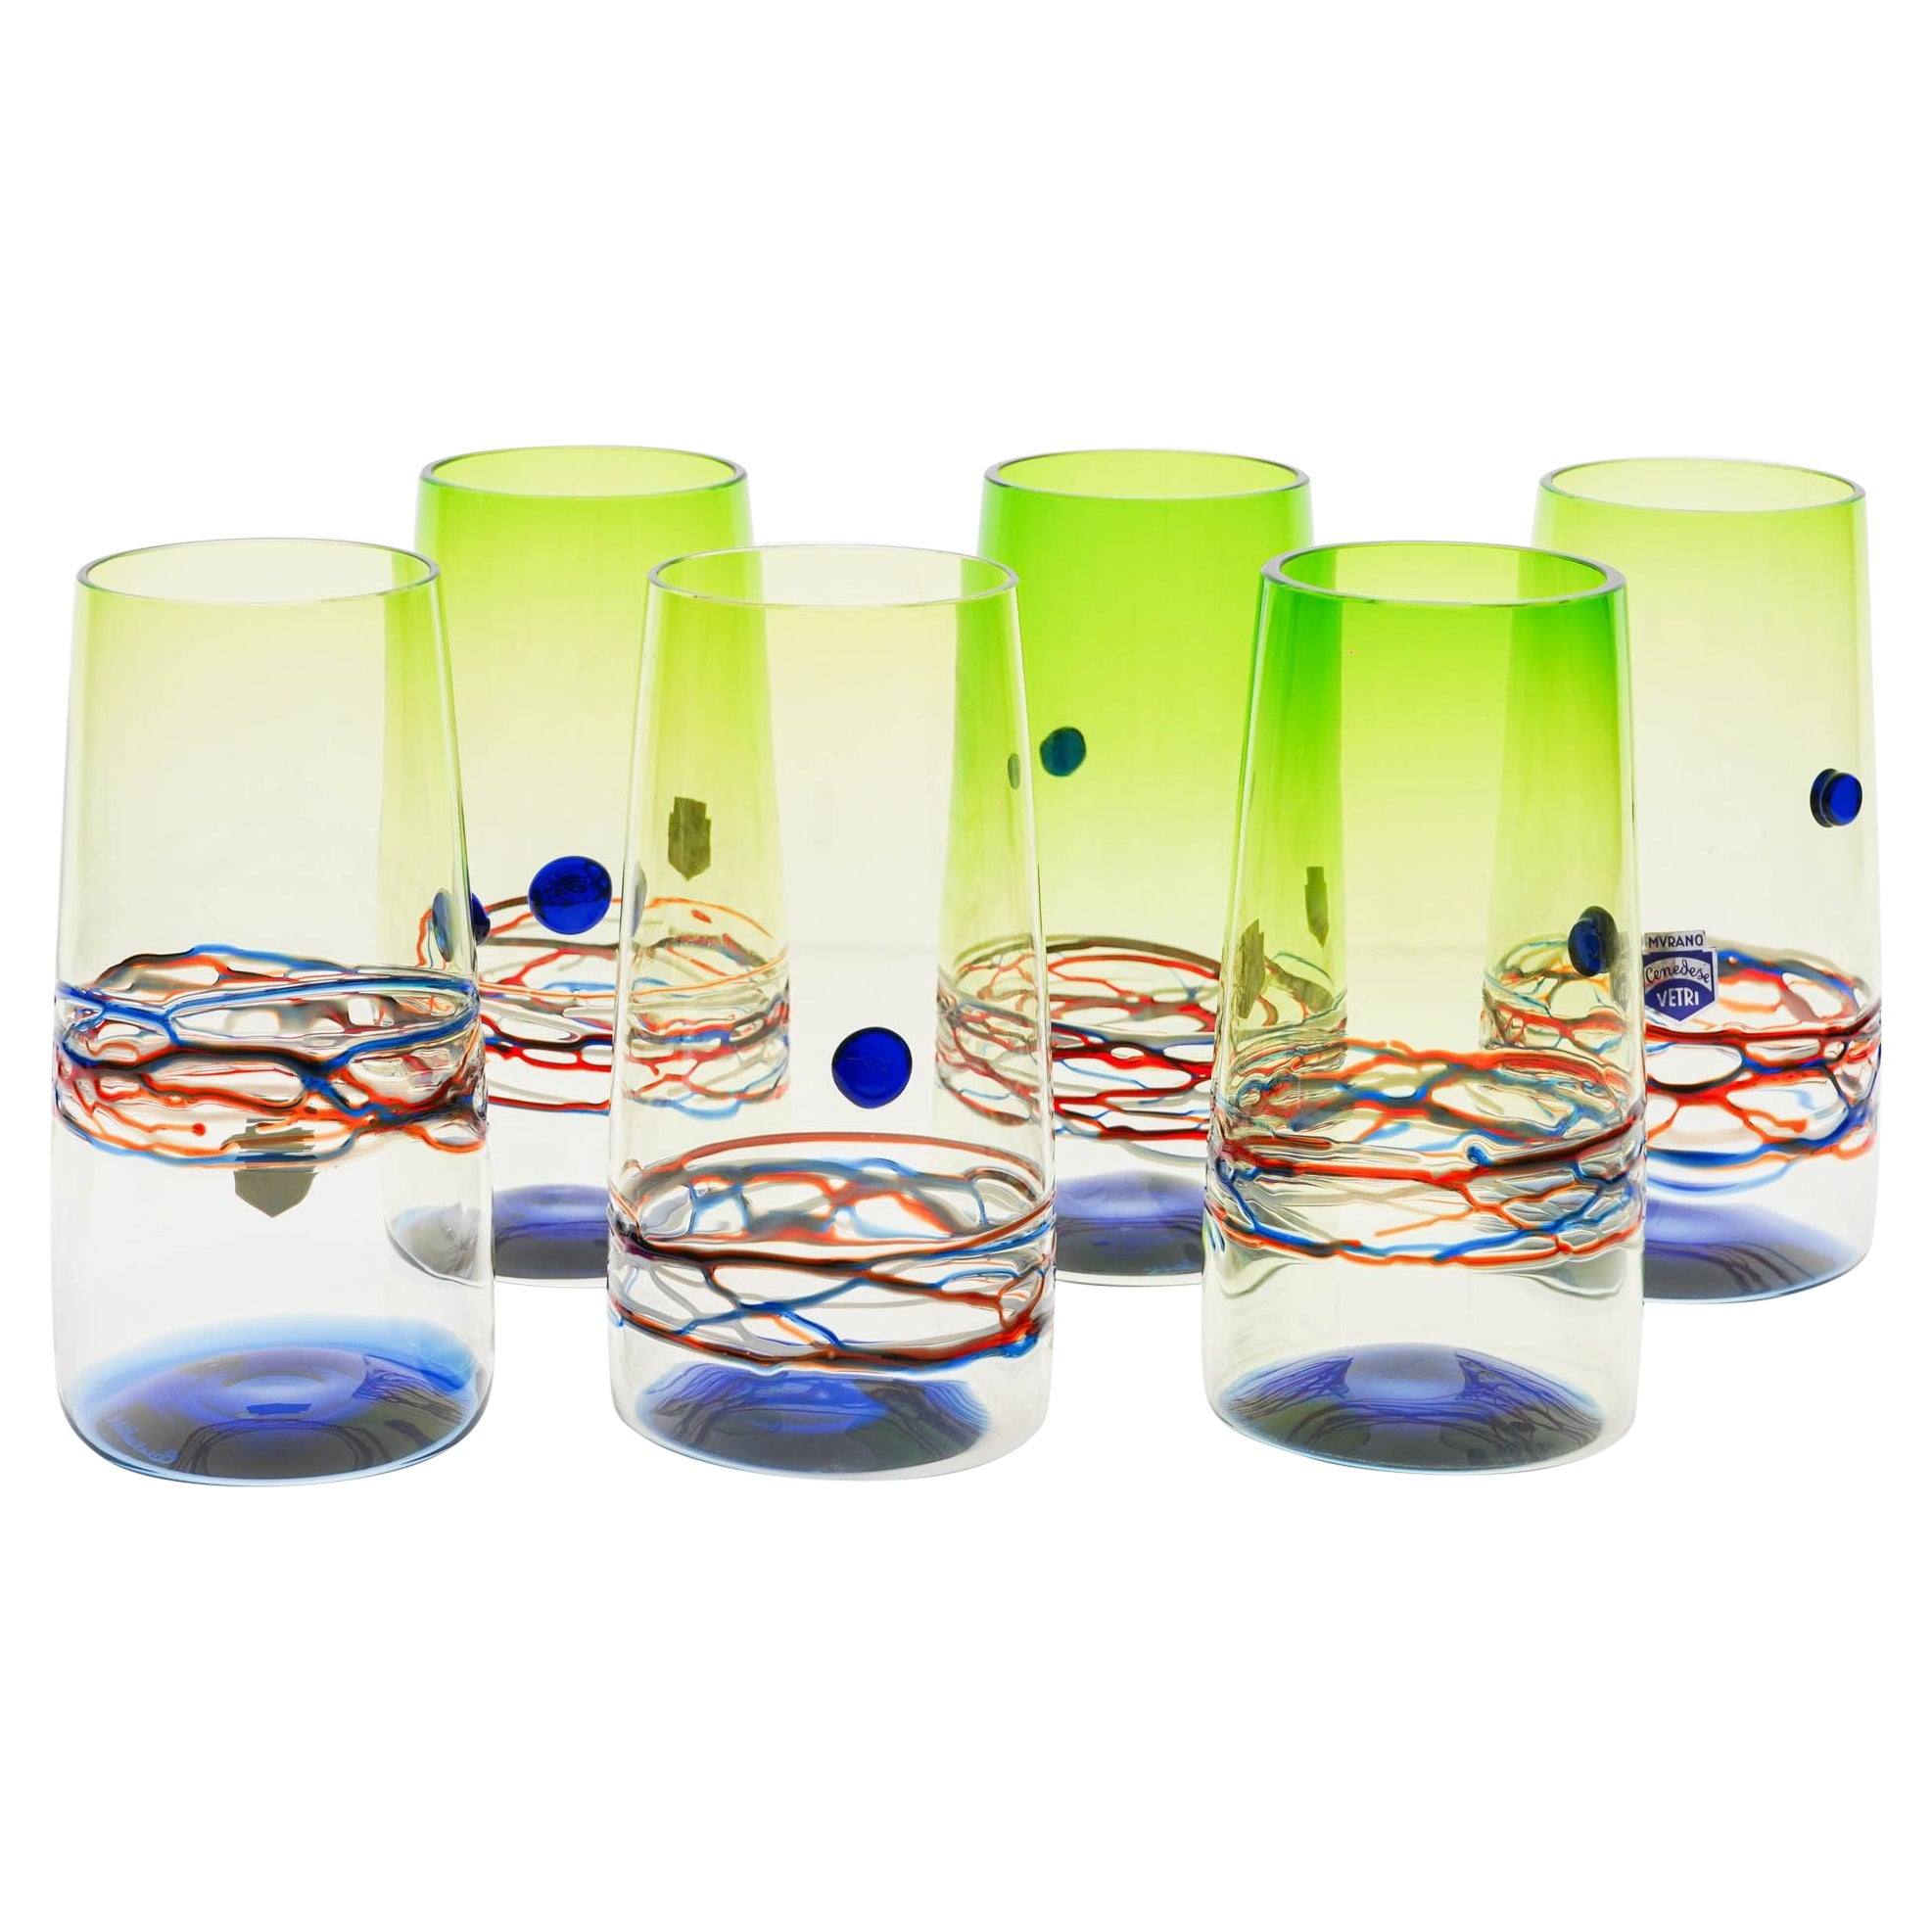 Unique Set of 6 Murano Tumblers, Cenedese Murano 1960, Young Collection, Signed For Sale